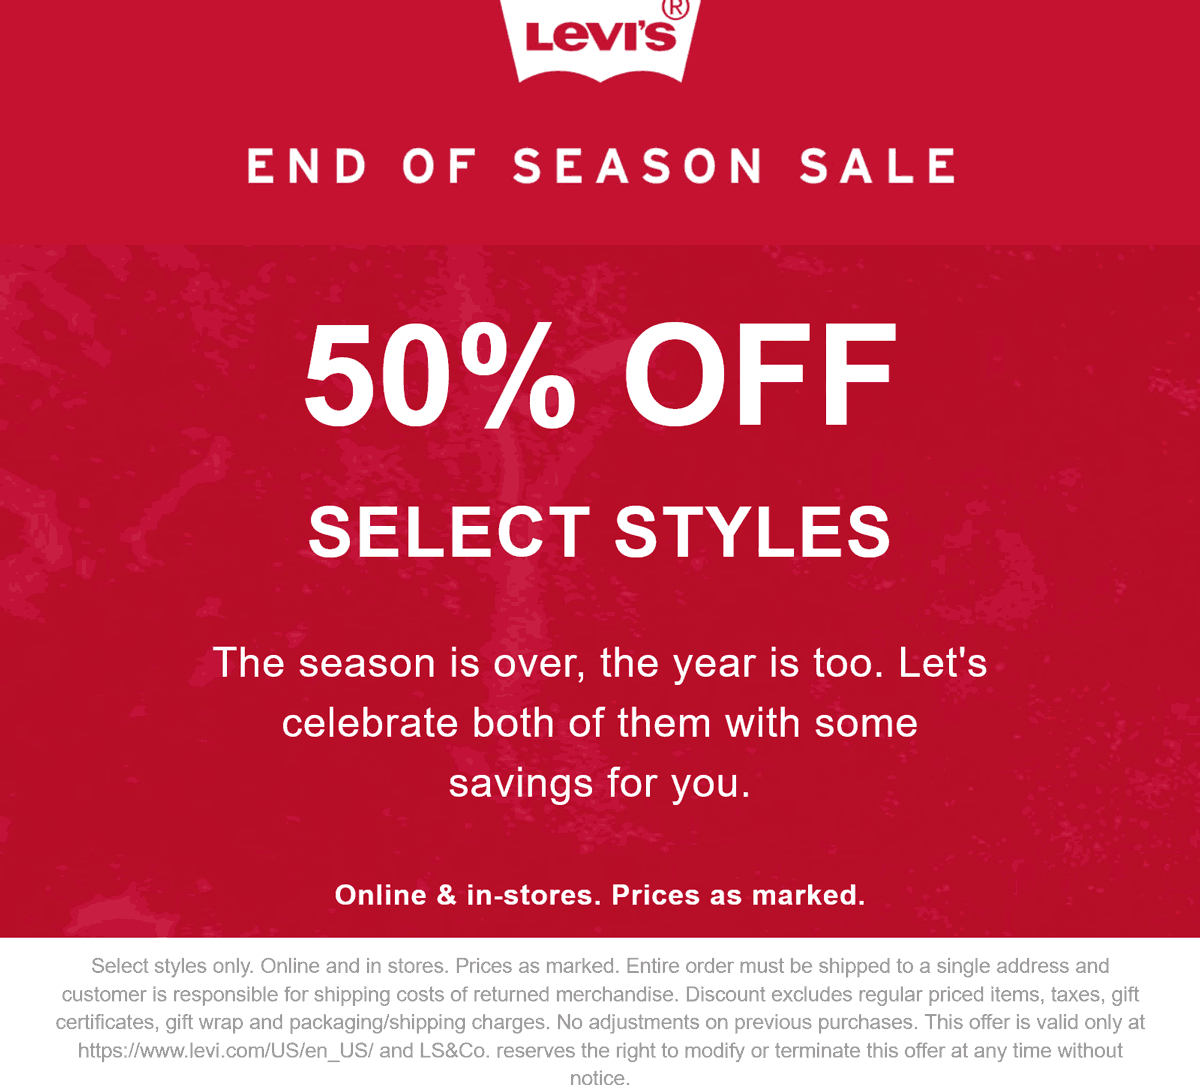 Levis coupons & promo code for [January 2023]